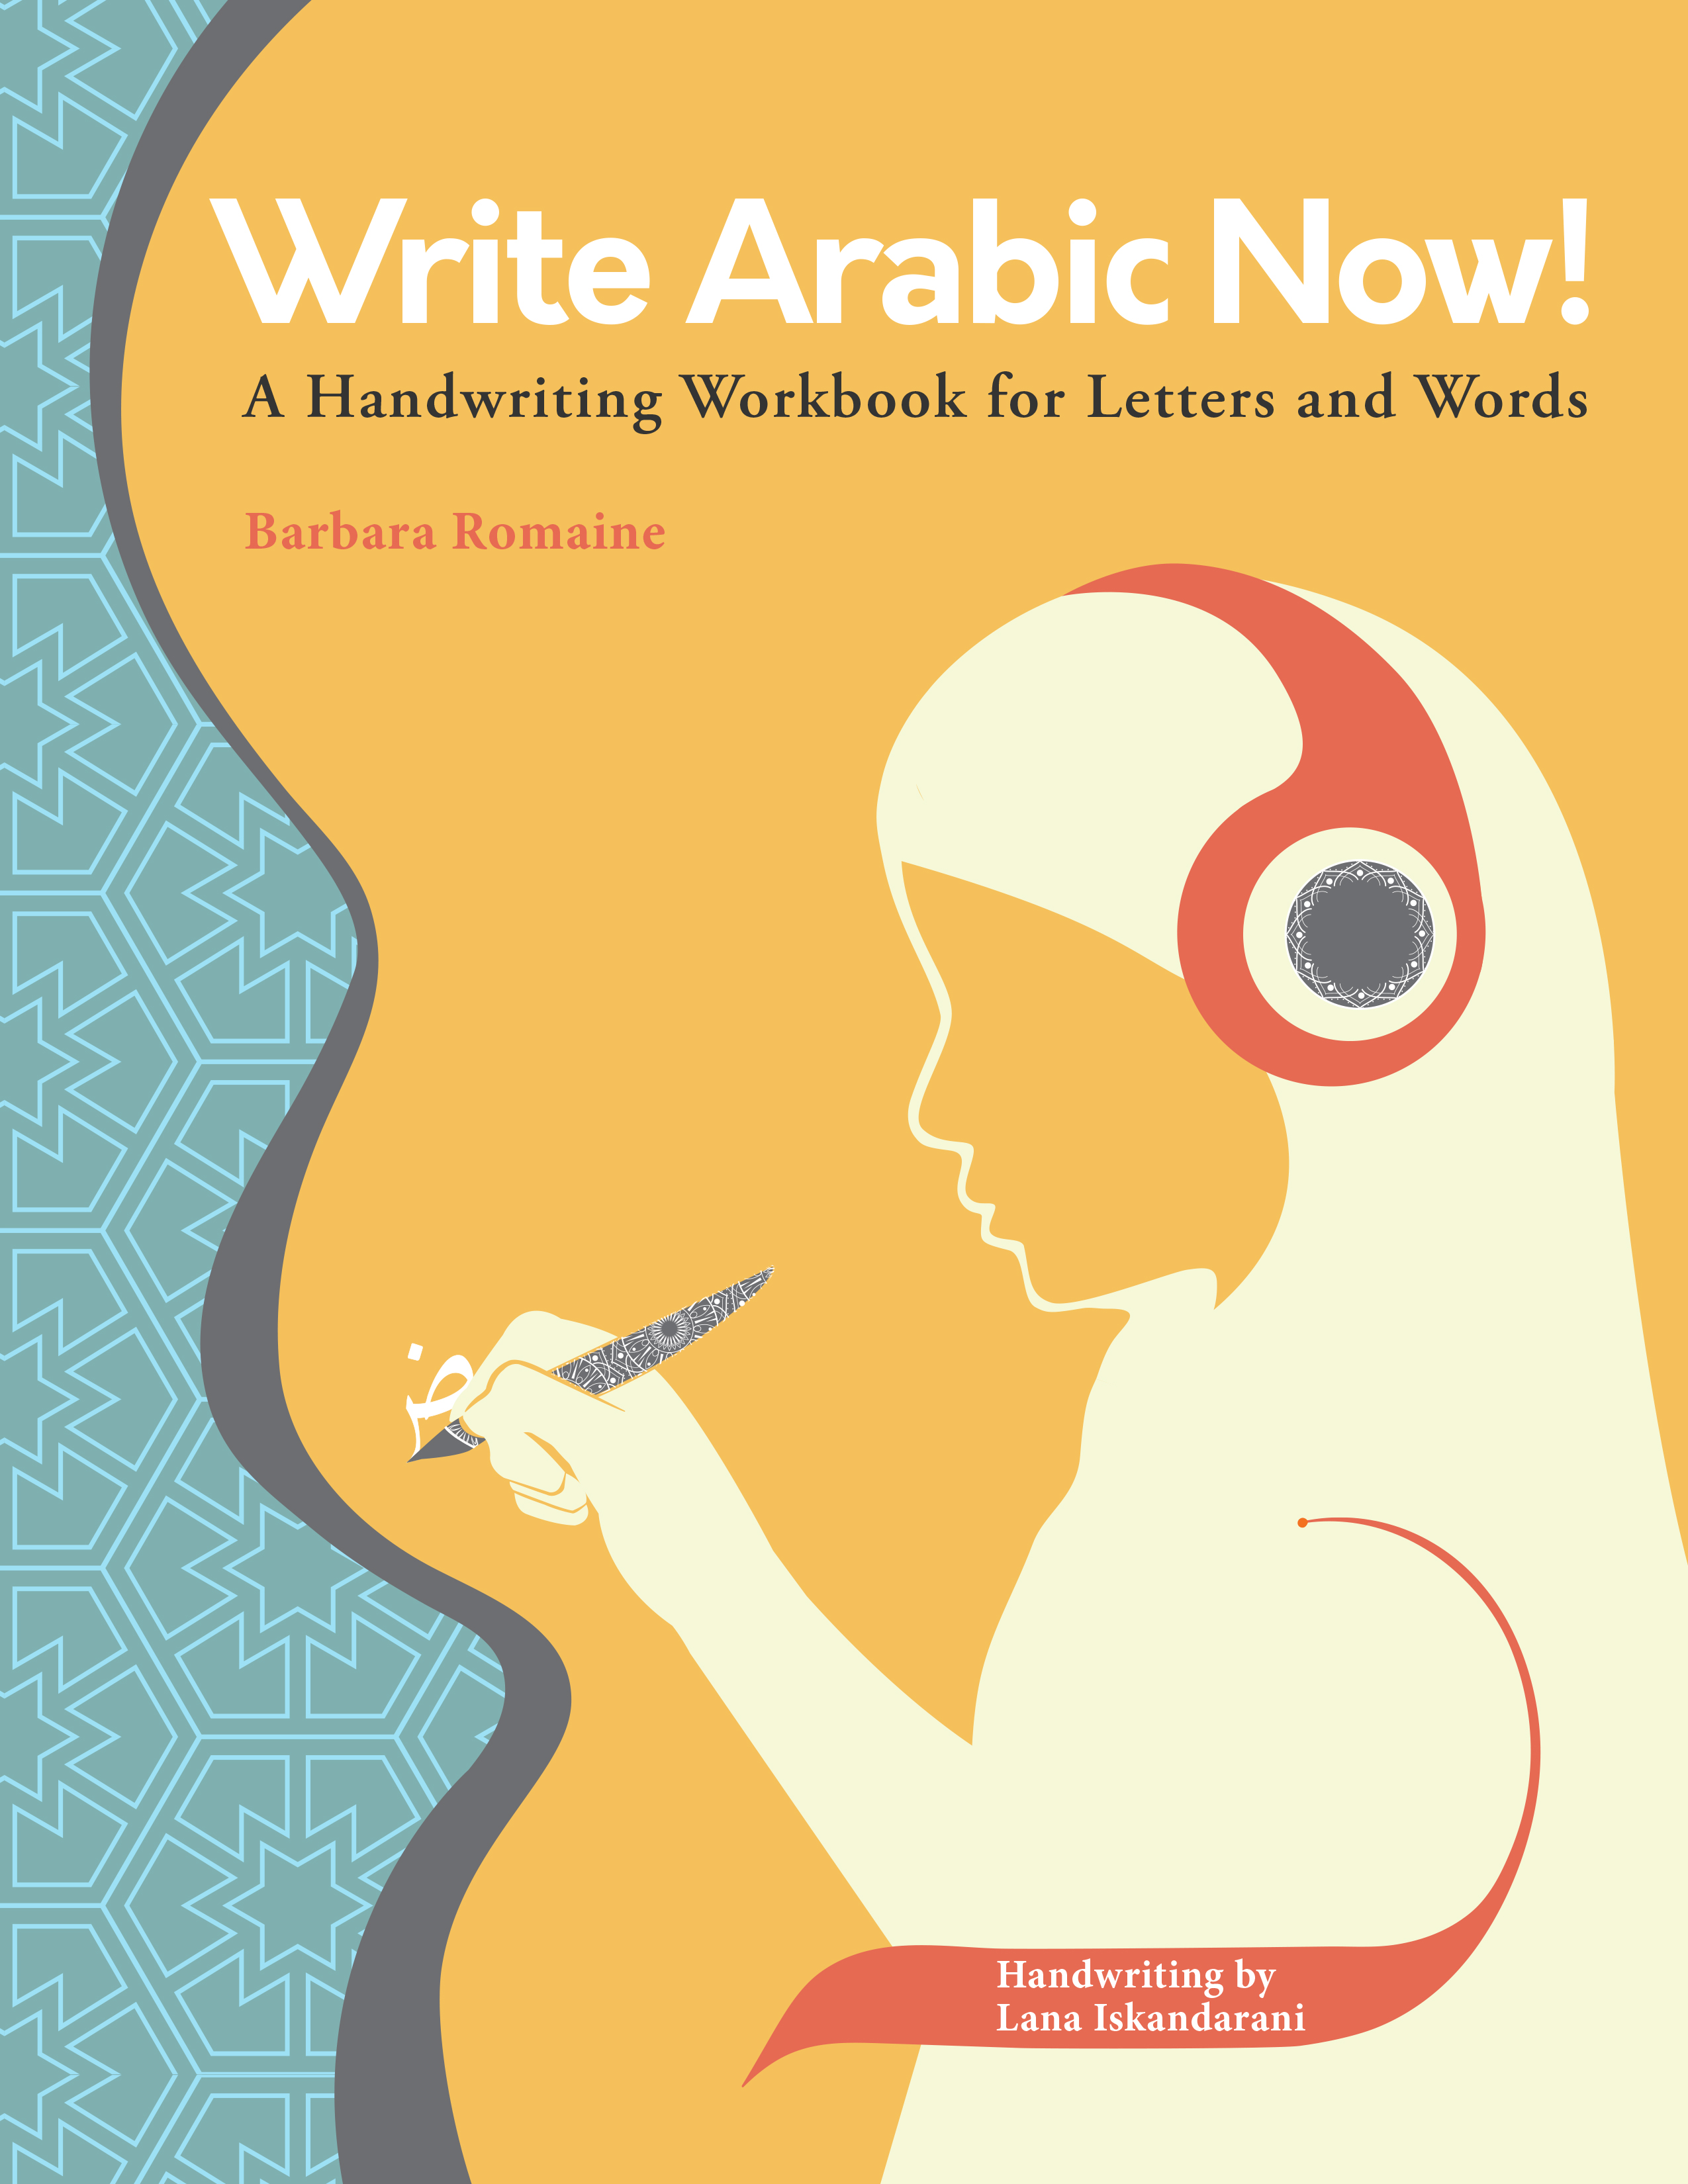 Image of the cover of the book, "Write Arabic Now!"